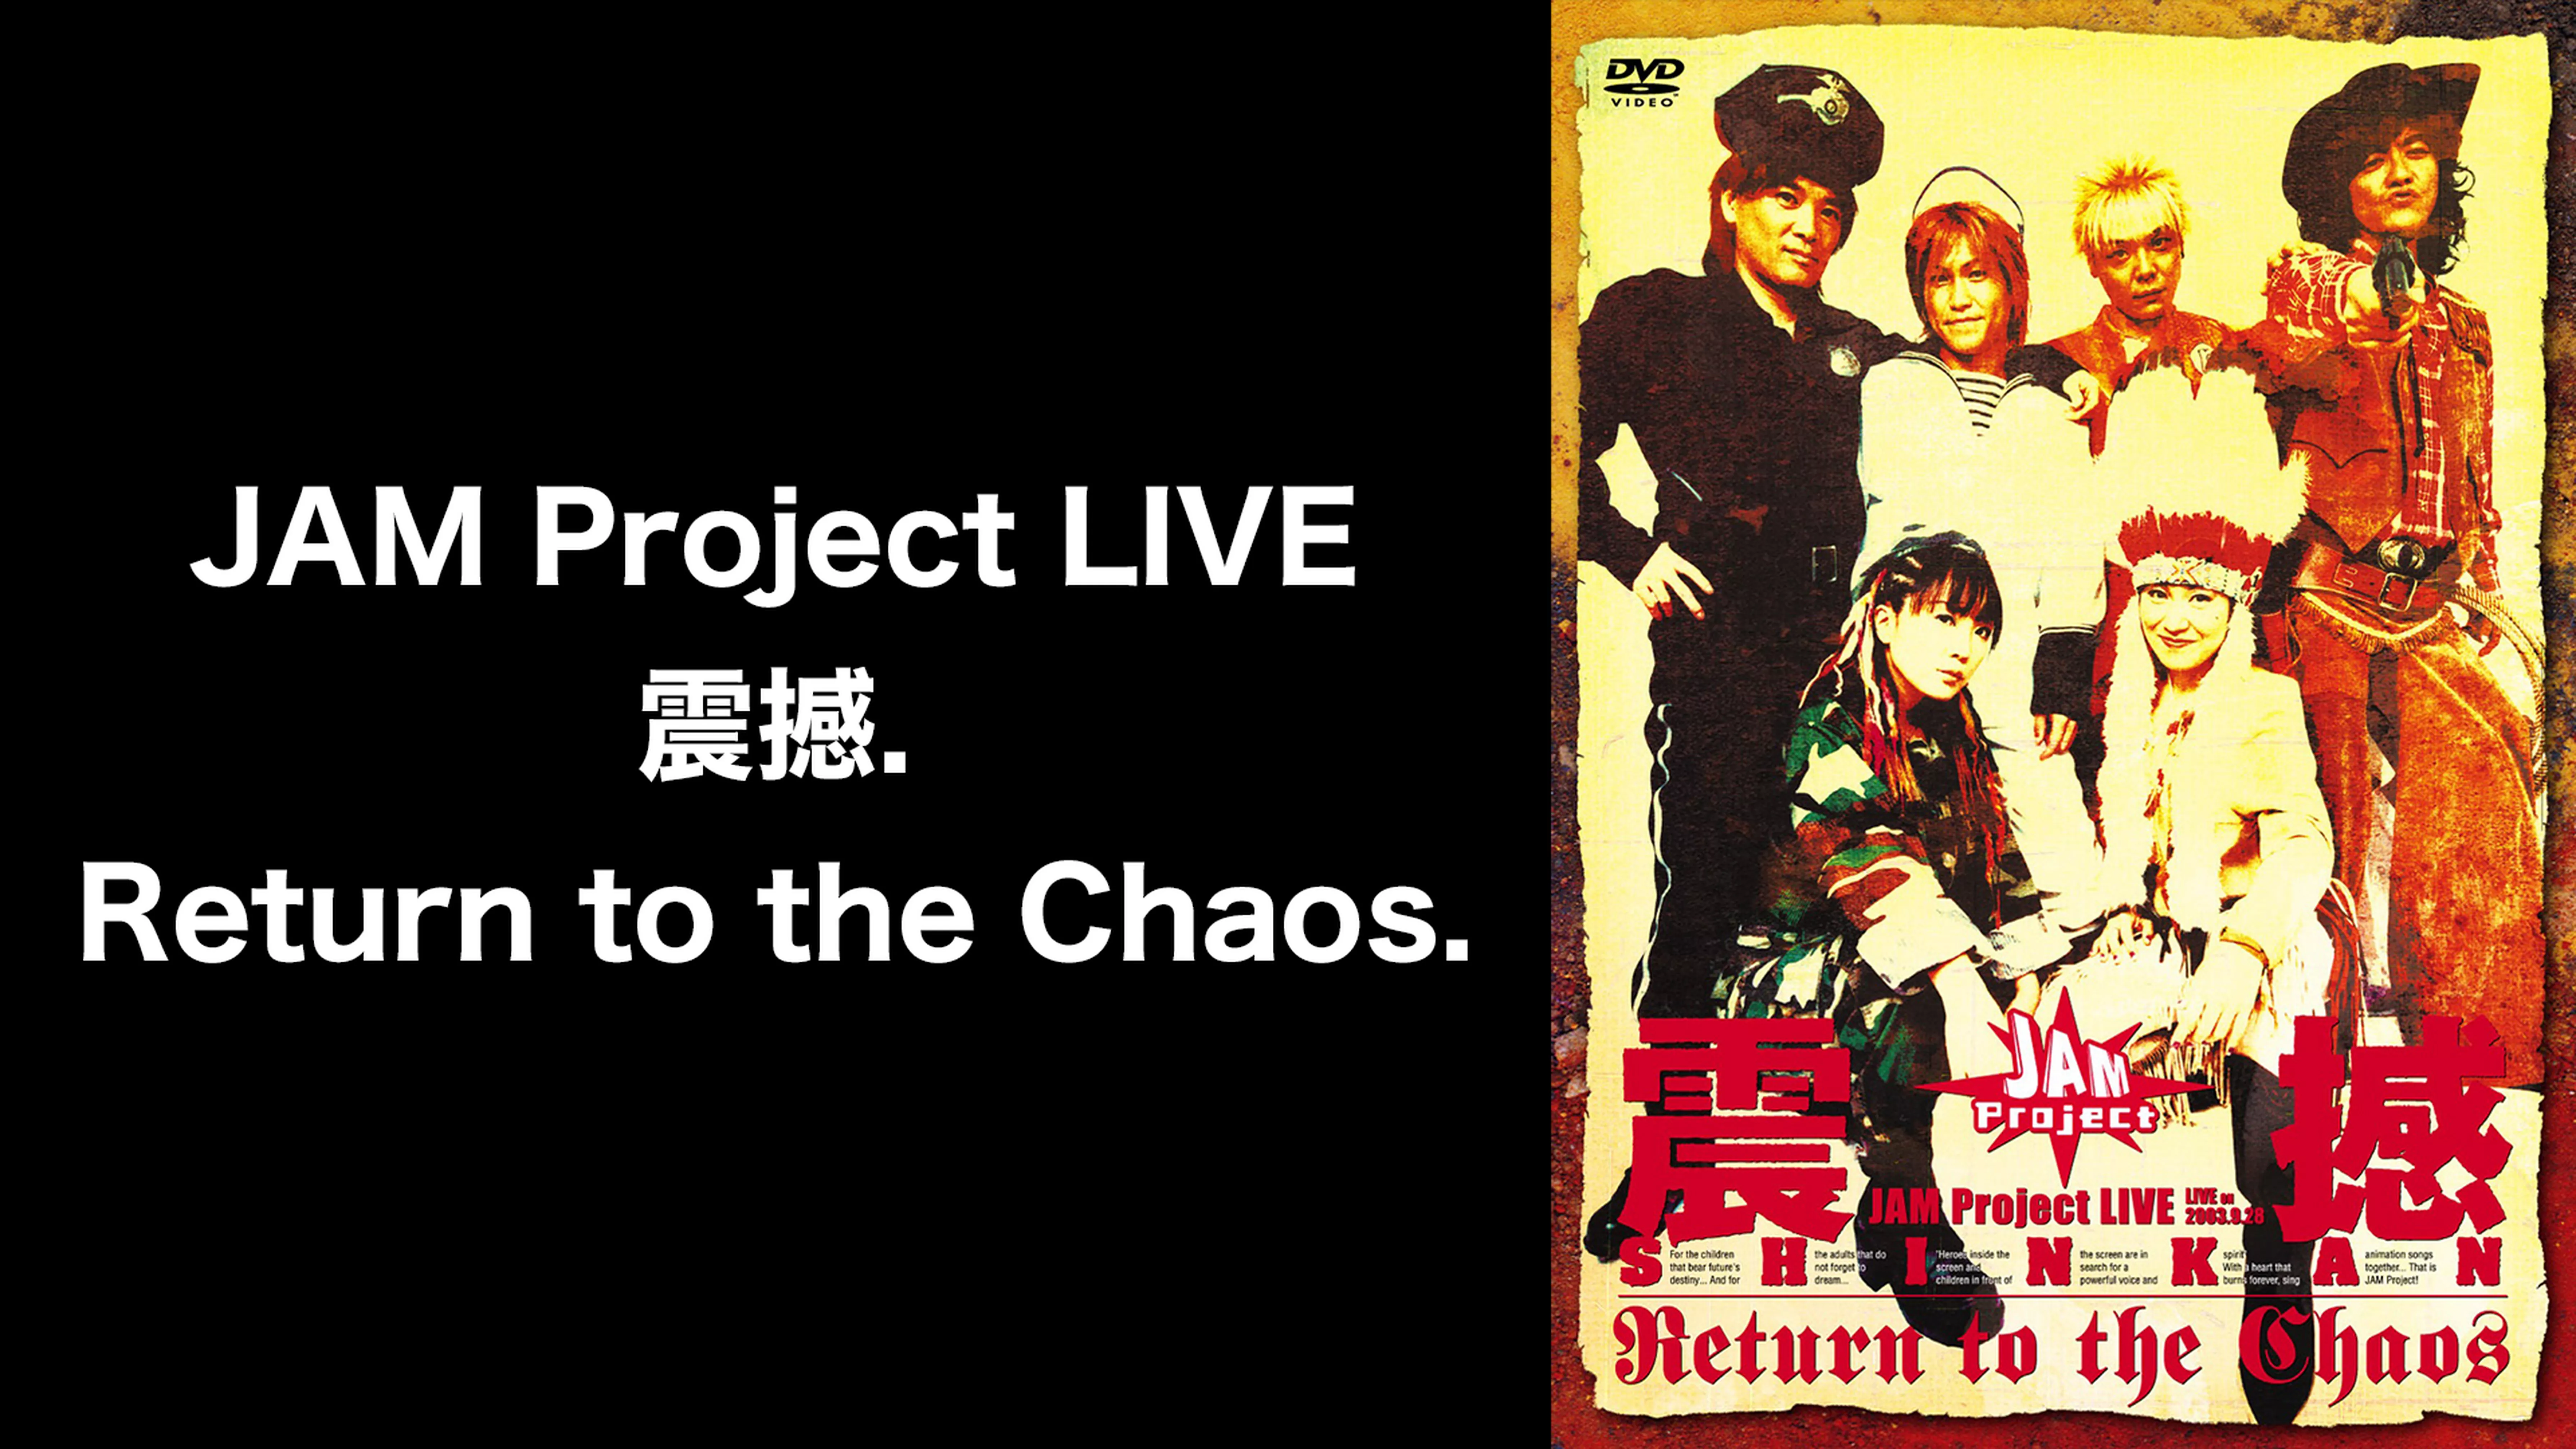 JAM Project LIVE 震撼. Return to the Chaos.